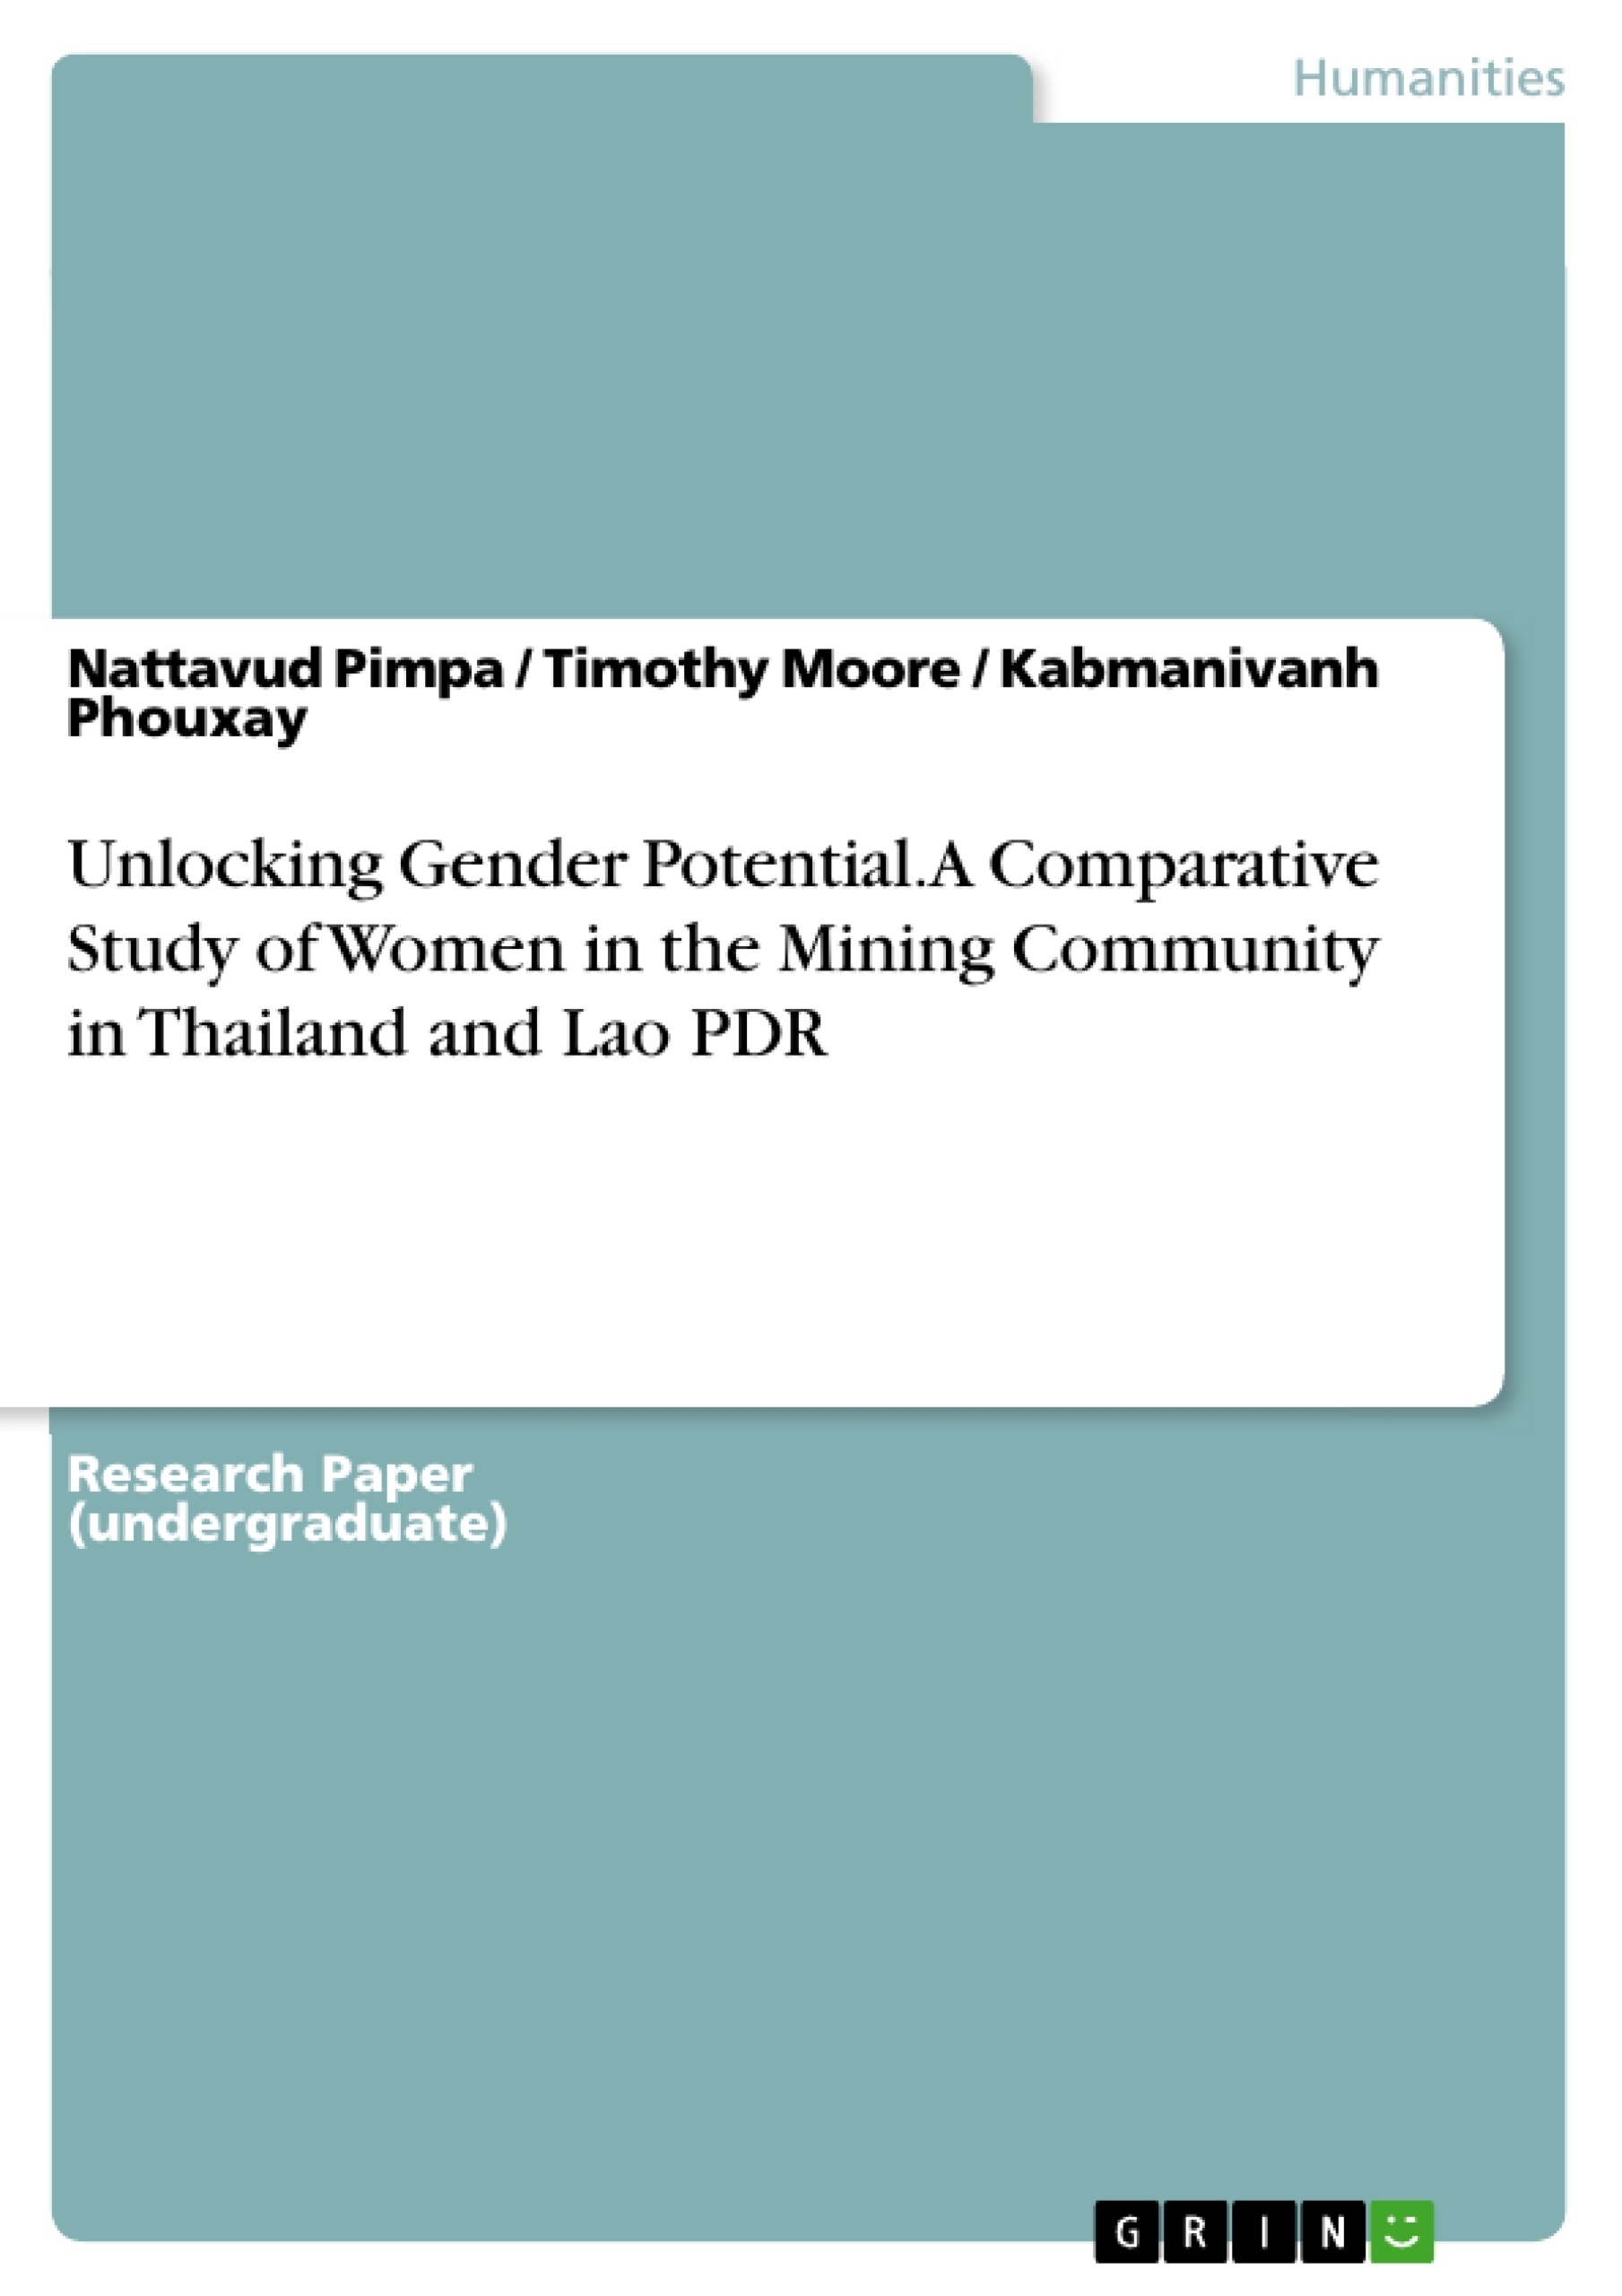 Title: Unlocking Gender Potential. A Comparative Study of Women in the Mining Community in Thailand and Lao PDR